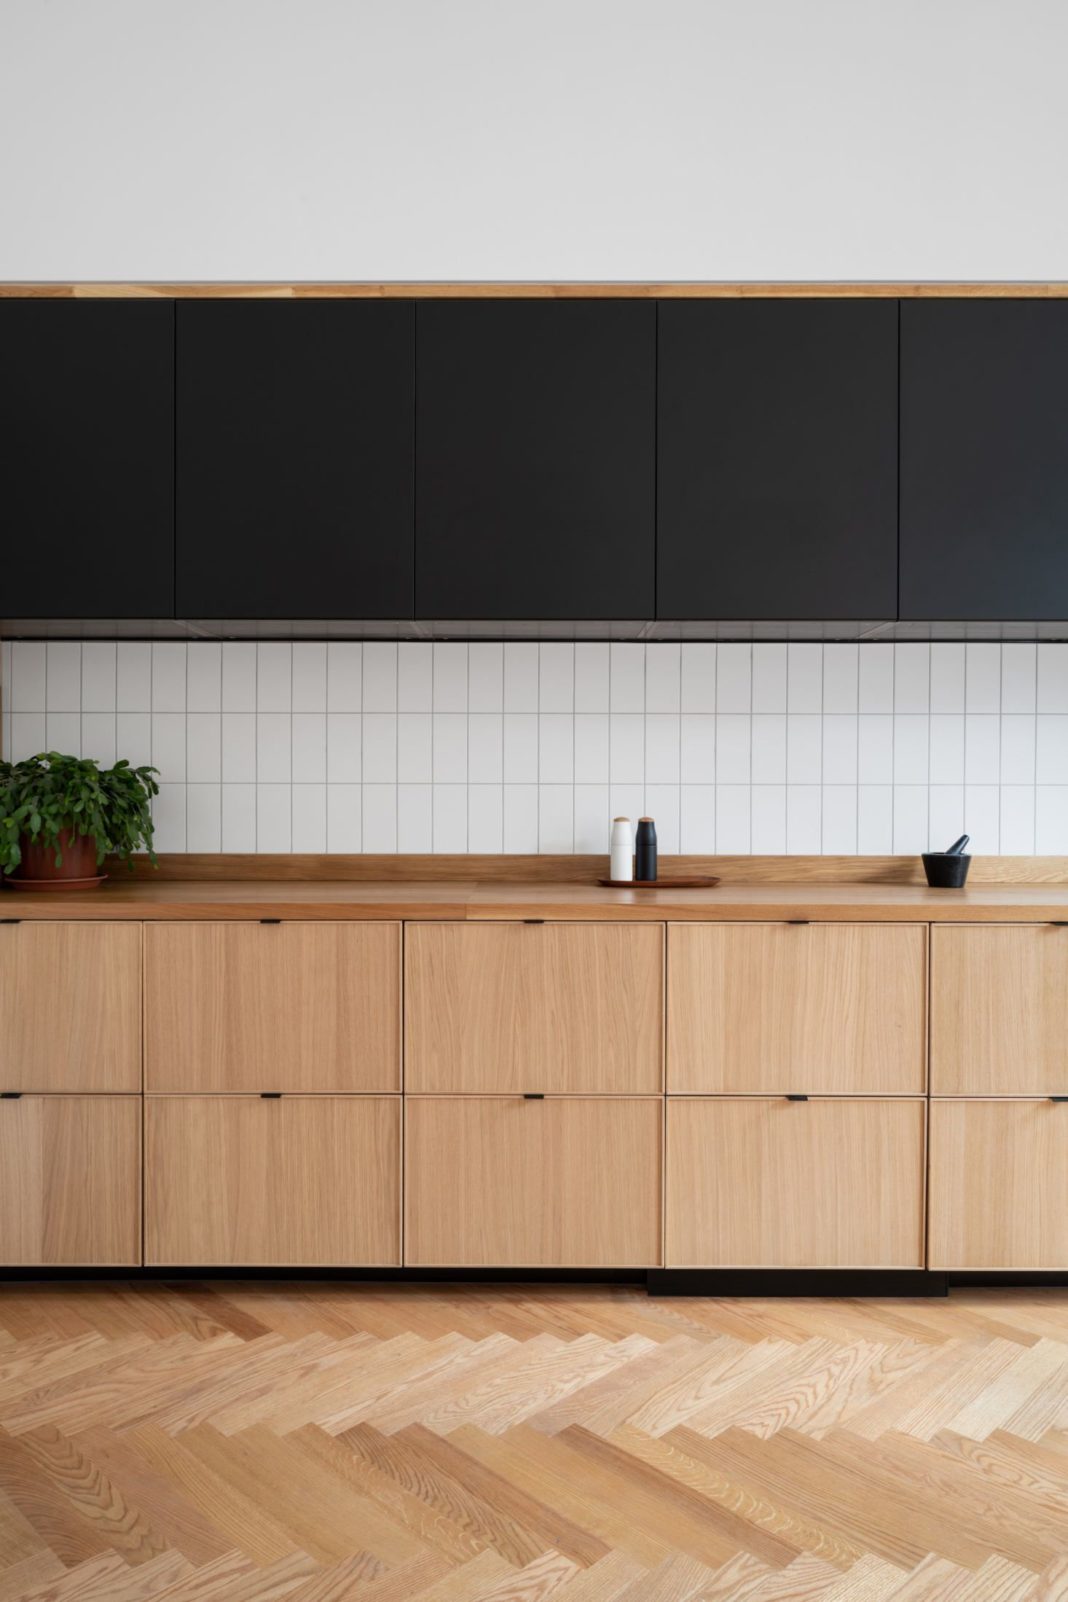 Kitchen of the Week: An Expensive-Looking Remodel for Just $13,000 - Remodelista